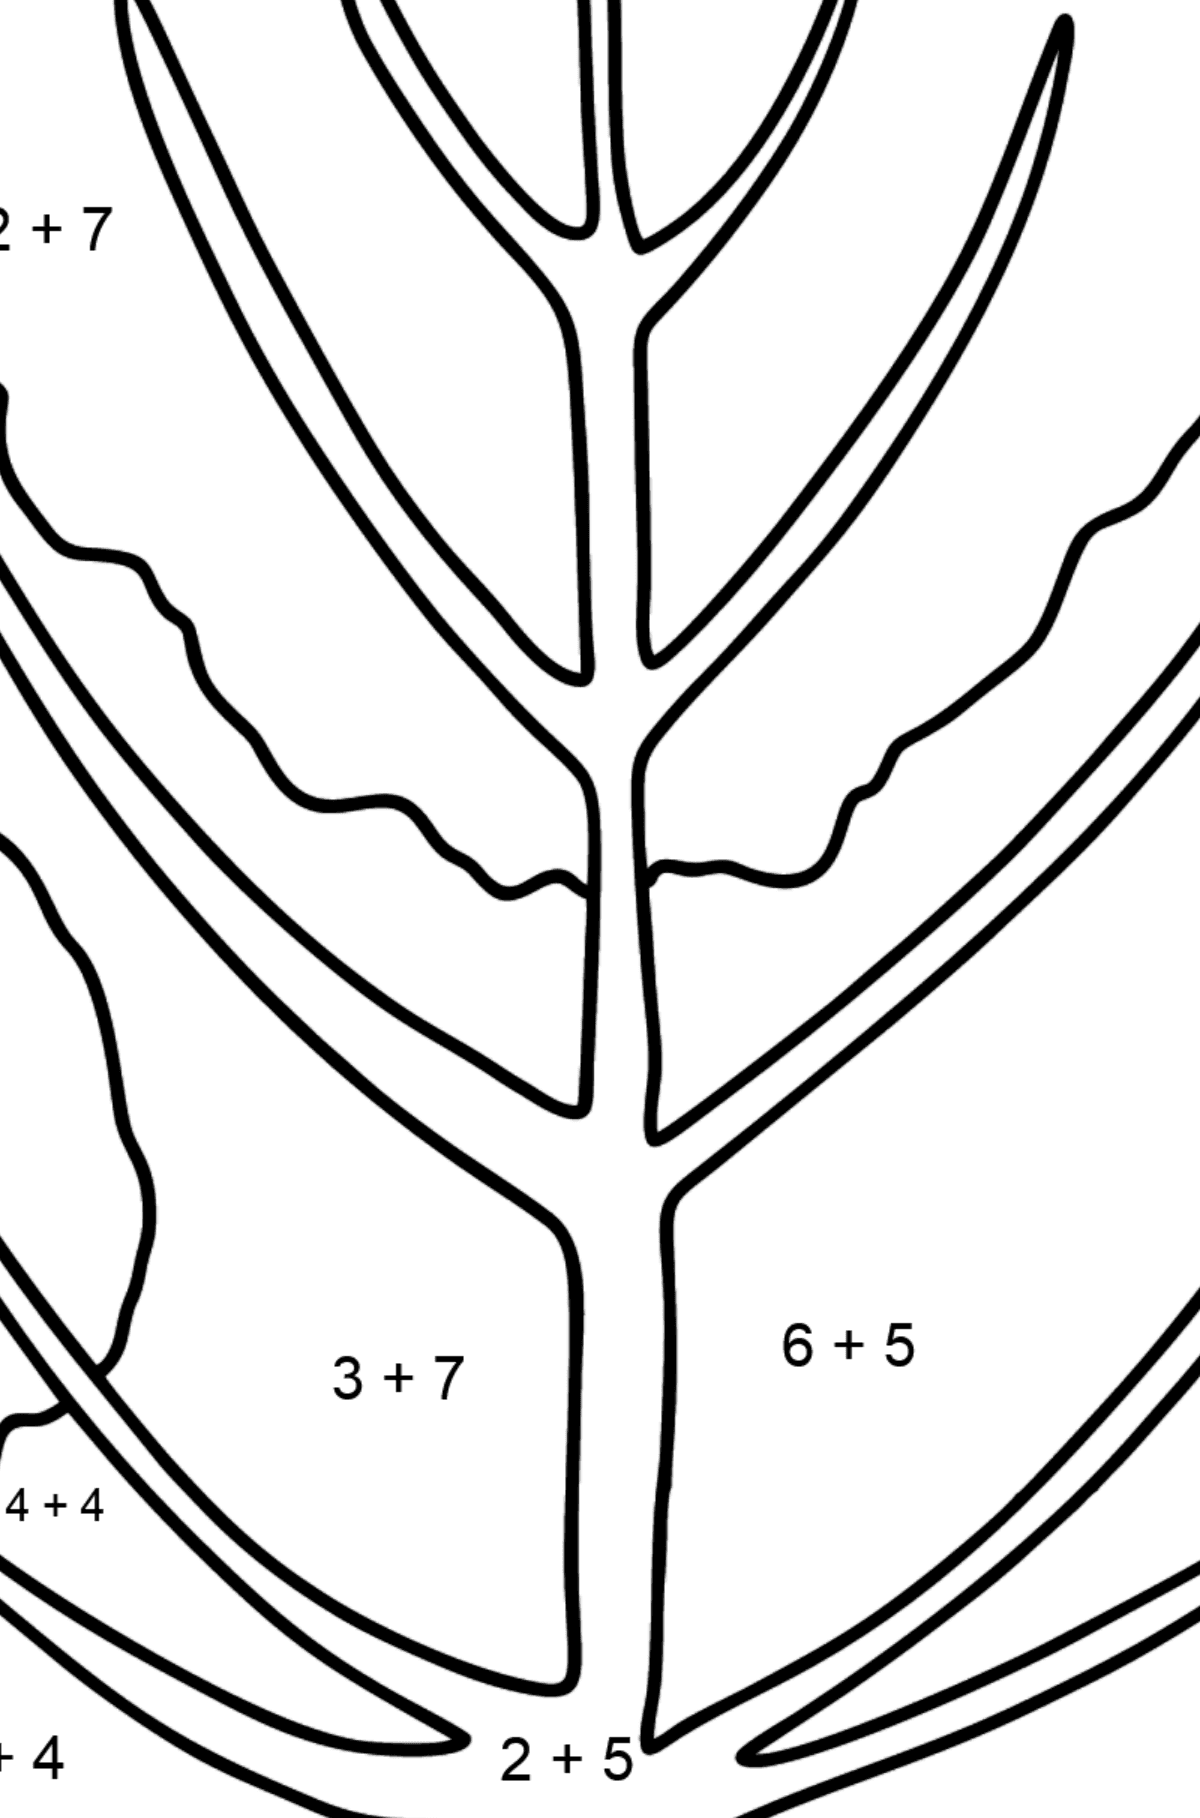 Aspen Leaf coloring page - Math Coloring - Addition for Kids